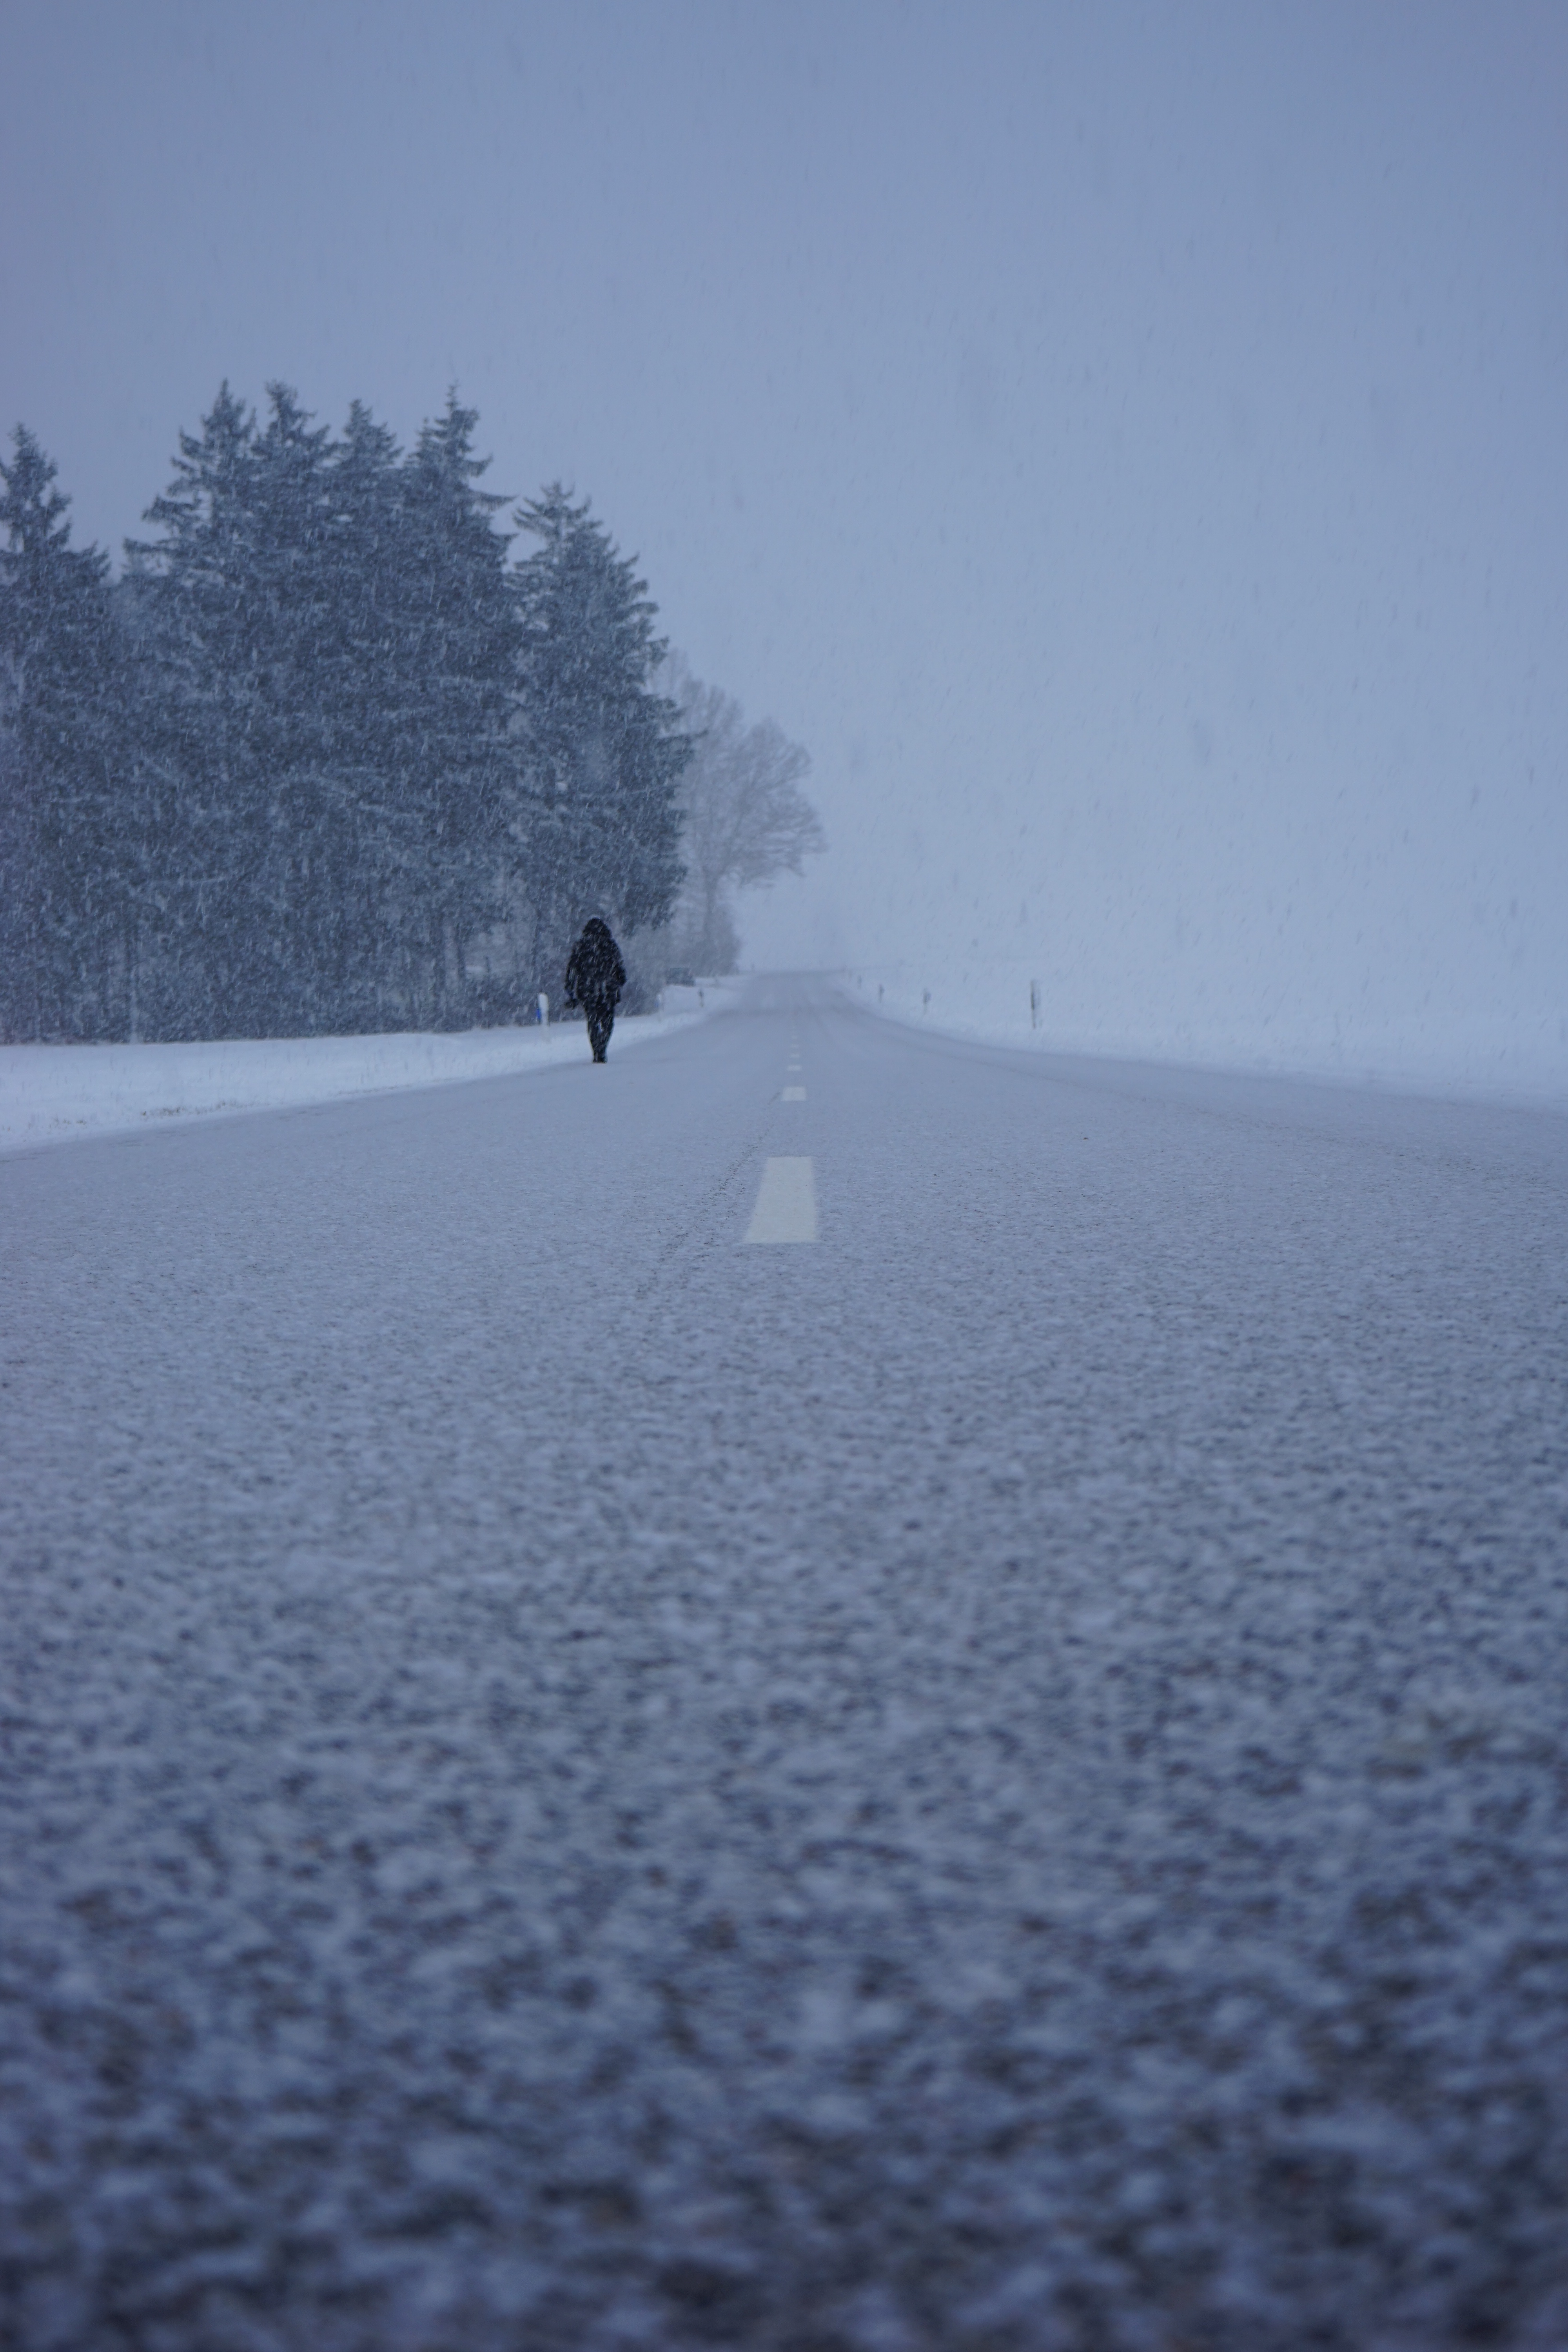 80408 download wallpaper winter, nature, silhouette, road, fog, snowstorm, snowfall screensavers and pictures for free